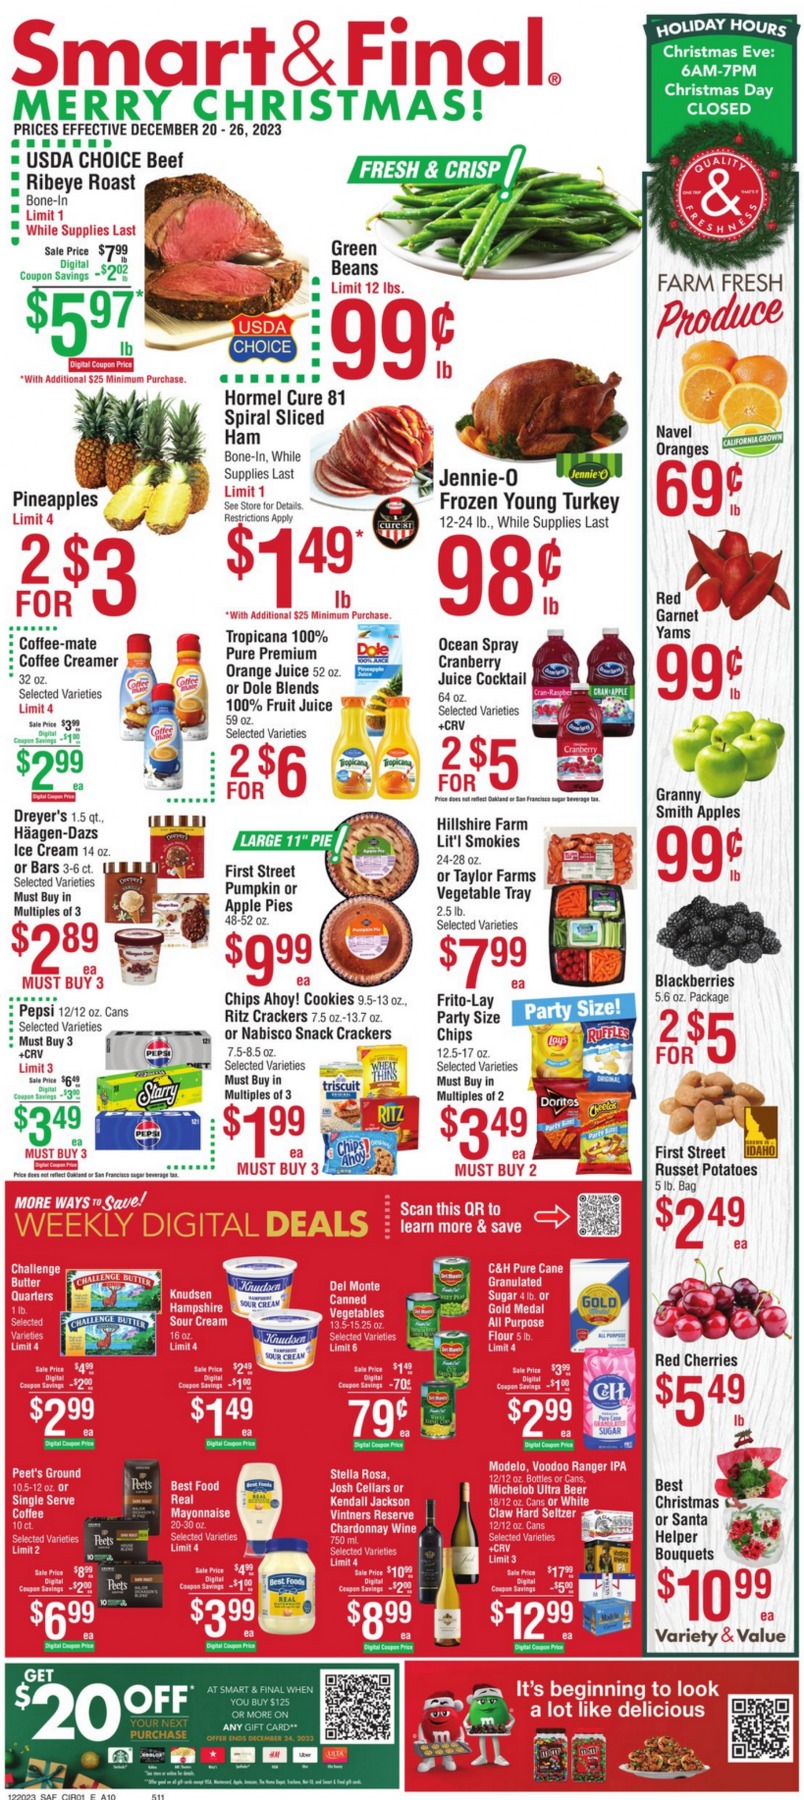 Smart and Final Christmas Deals 2023 1 – smart and final ad 1 2